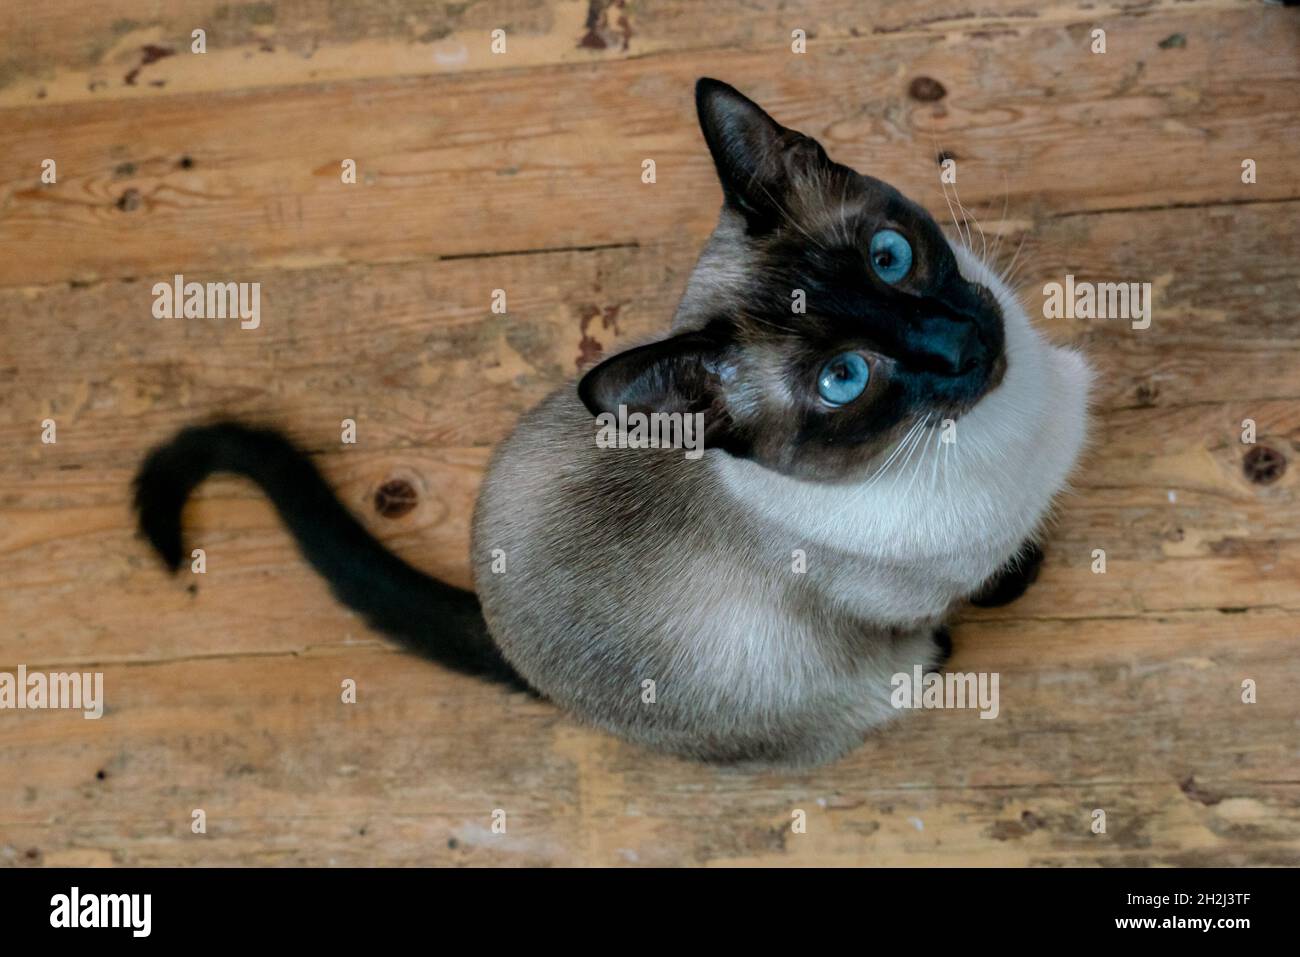 Siamese kitten with blue eyes looking upwards while sitting on wooden floor. High angle shot Stock Photo